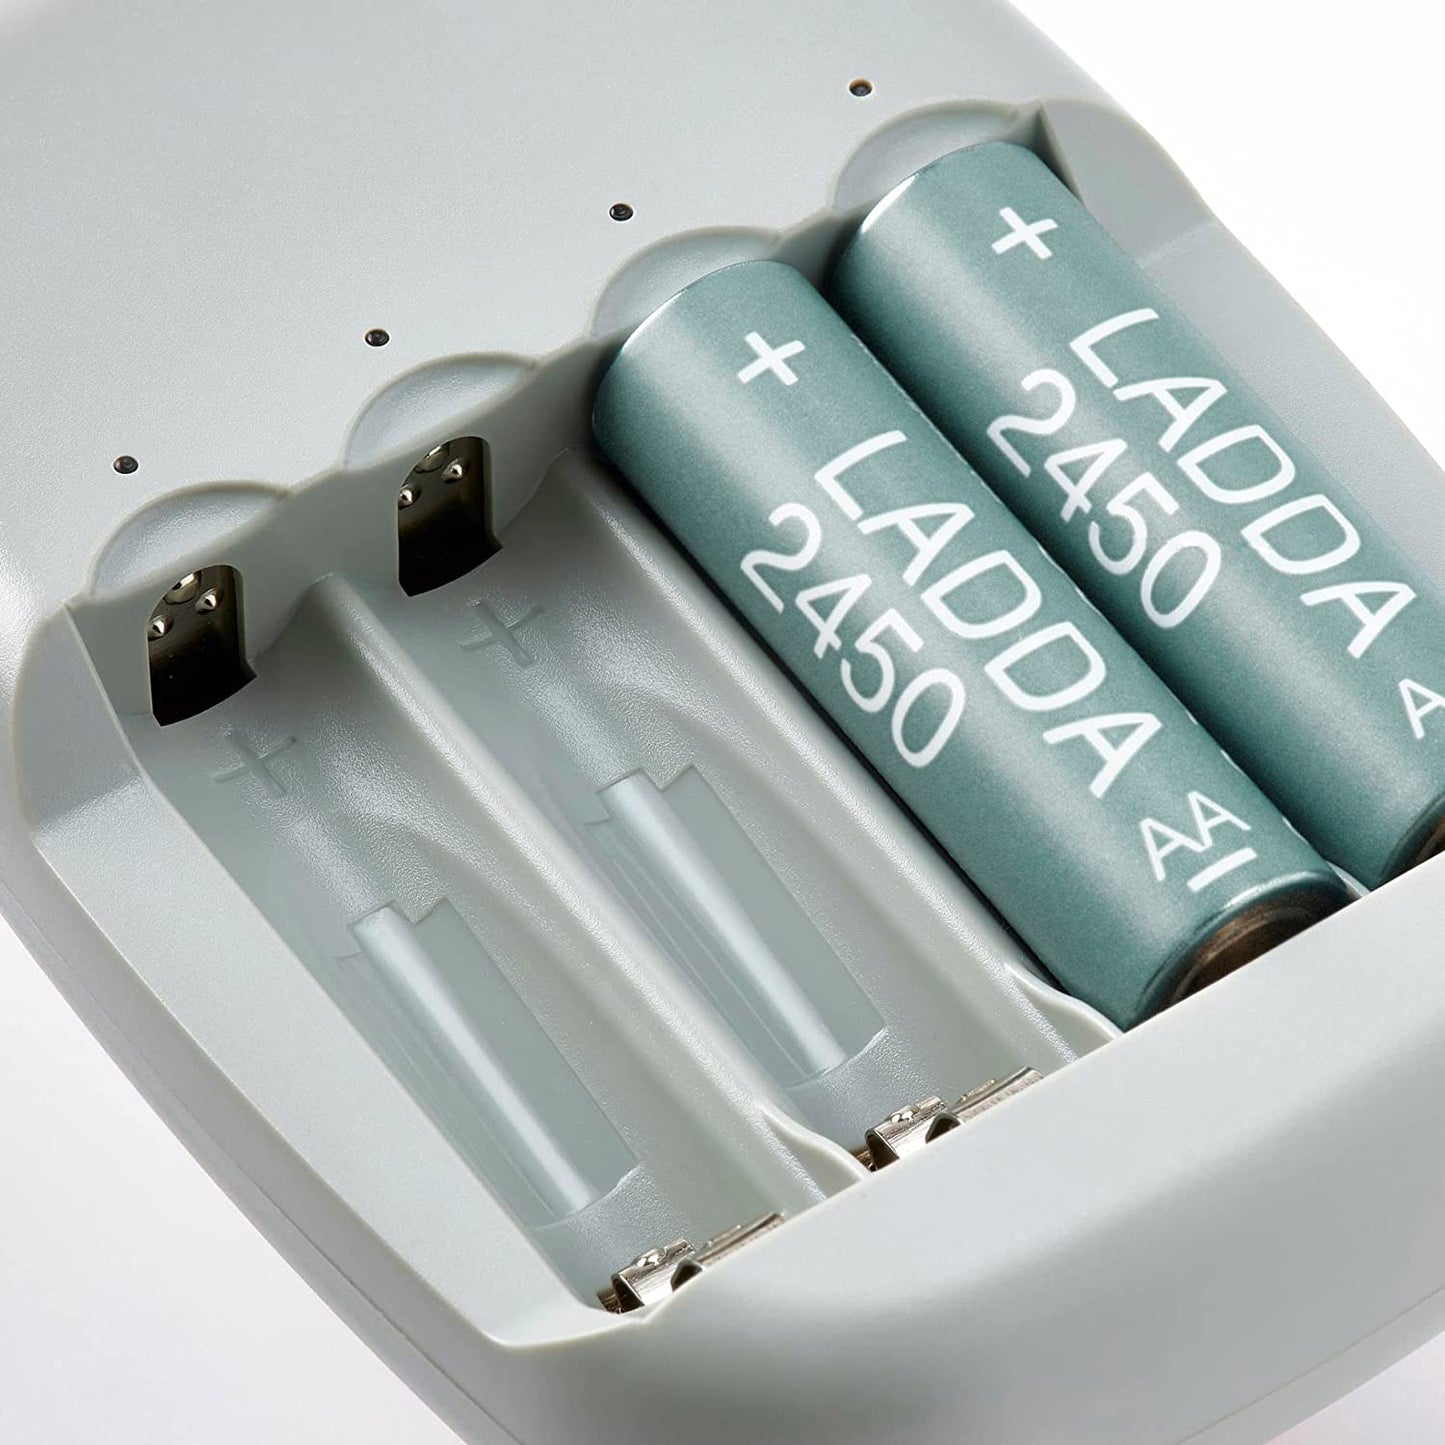 STENKOL/LADDA Battery charger and 4 batteries